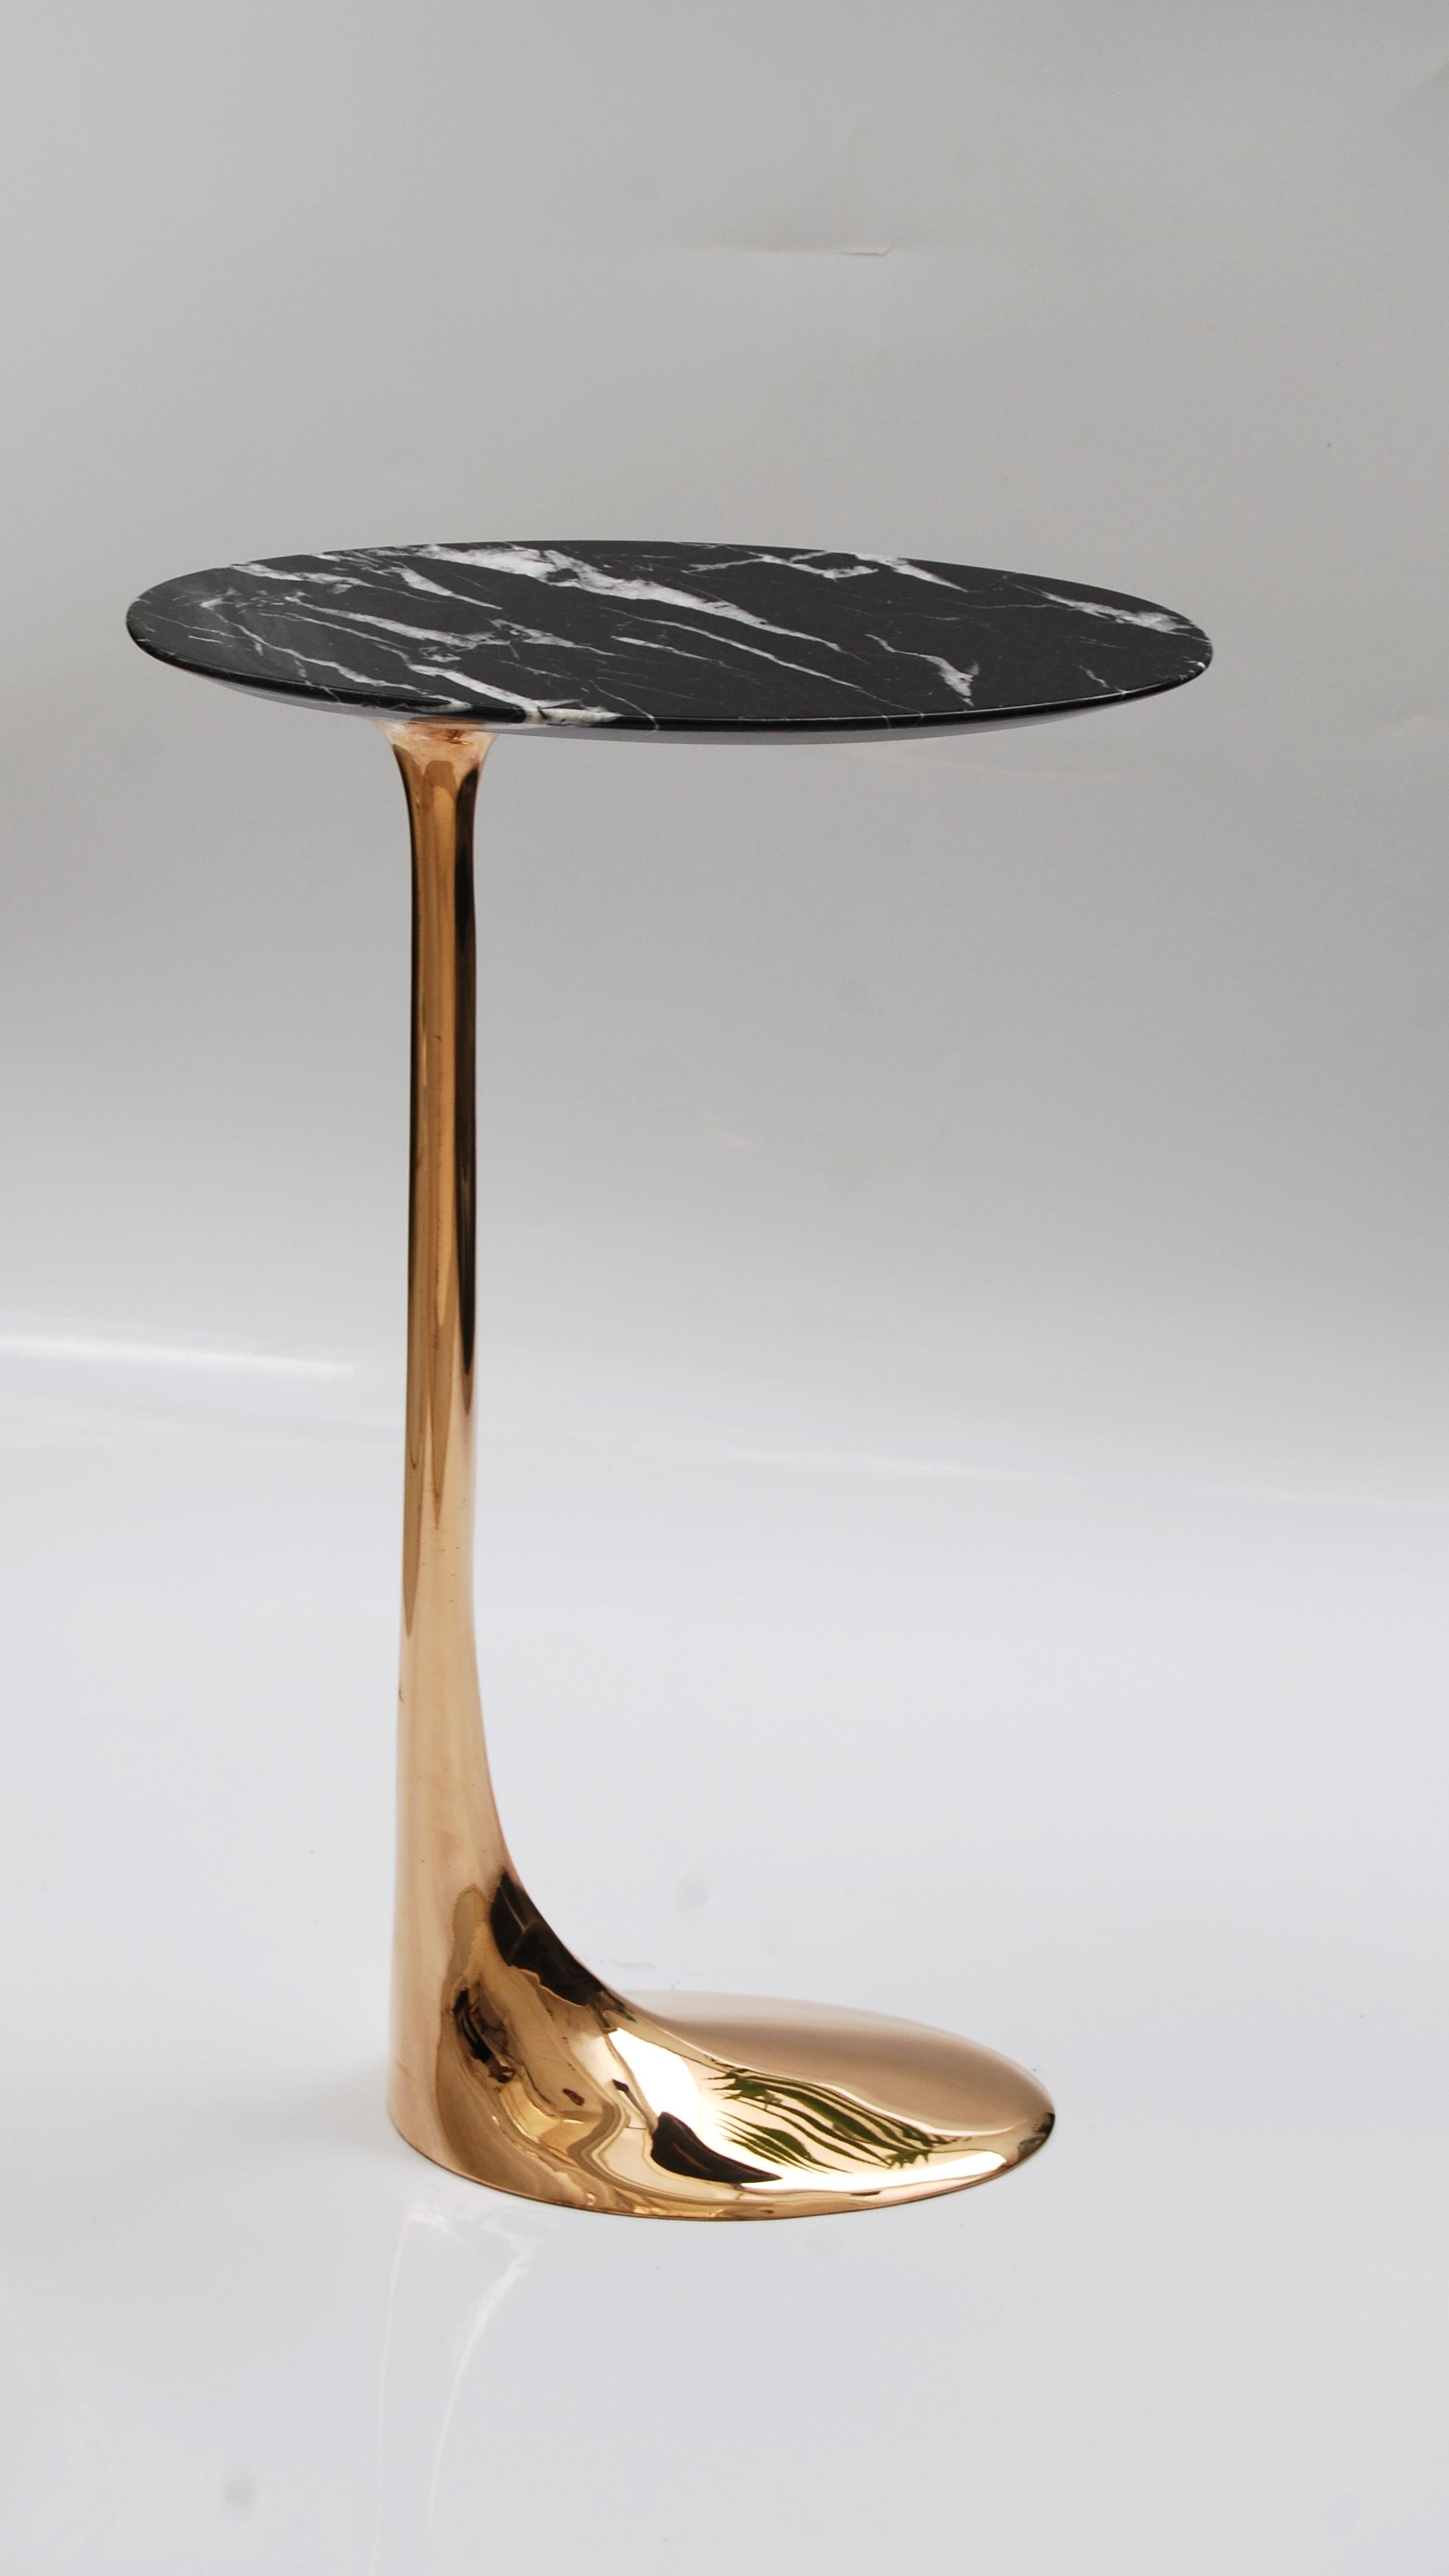 Pair of marble and polished bronze tables by Fakasaka Design
Dimensions: W 18 x D 38 x H 62 cm
Materials: polished bronze, dark bronze, nero marquina marble.

